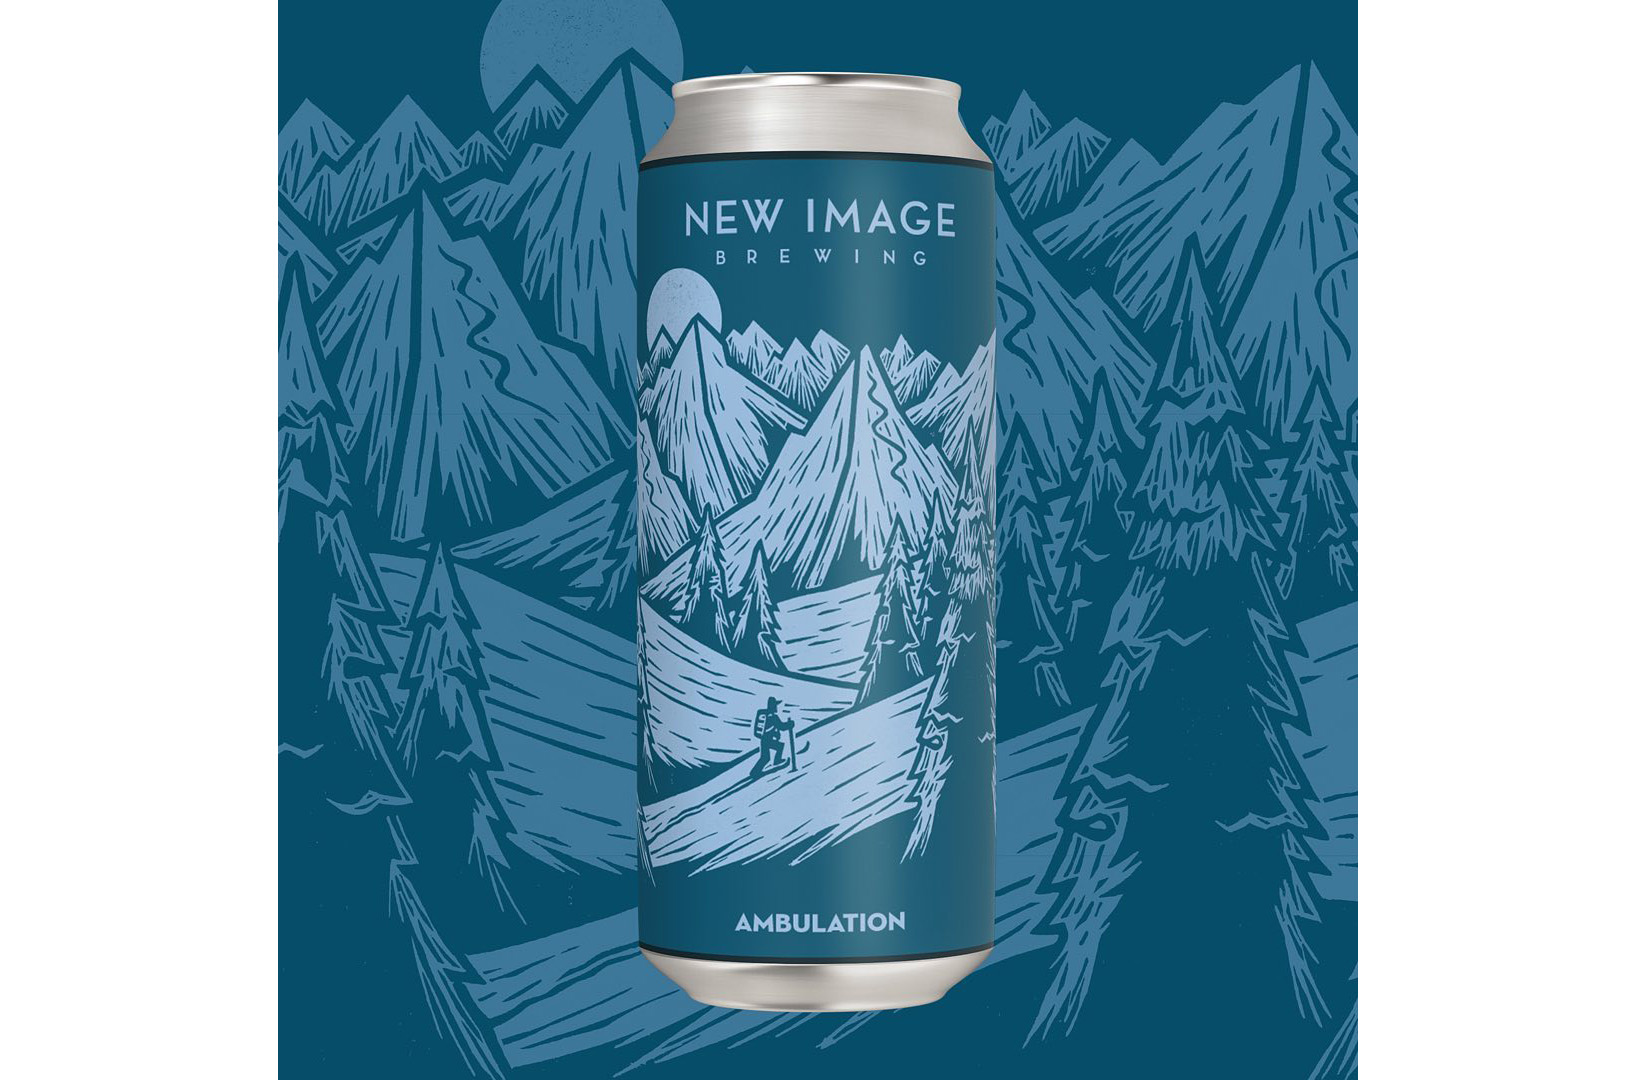 On our latest CRAFTED podcast, artist, John Fellows, and New Image Brewing founder & head brewer, Brandon Capps, are back on CRAFTED to discuss our Blister Artist Series collab. John talks about his inspiration for the artwork and how he produced it; Brandon talks about creating the beer by starting with John’s artwork; Jonathan Ellsworth talks about how he came up with the name of the beer (Ambulation); and we also discuss the difference between a Pale Ale, IPA, Double IPA, and barely wine; wabi sabi & kintsugi; and more. Check it out, and pick up our 1st Blister Artist Series shirt for a gift for yourself or someone else.